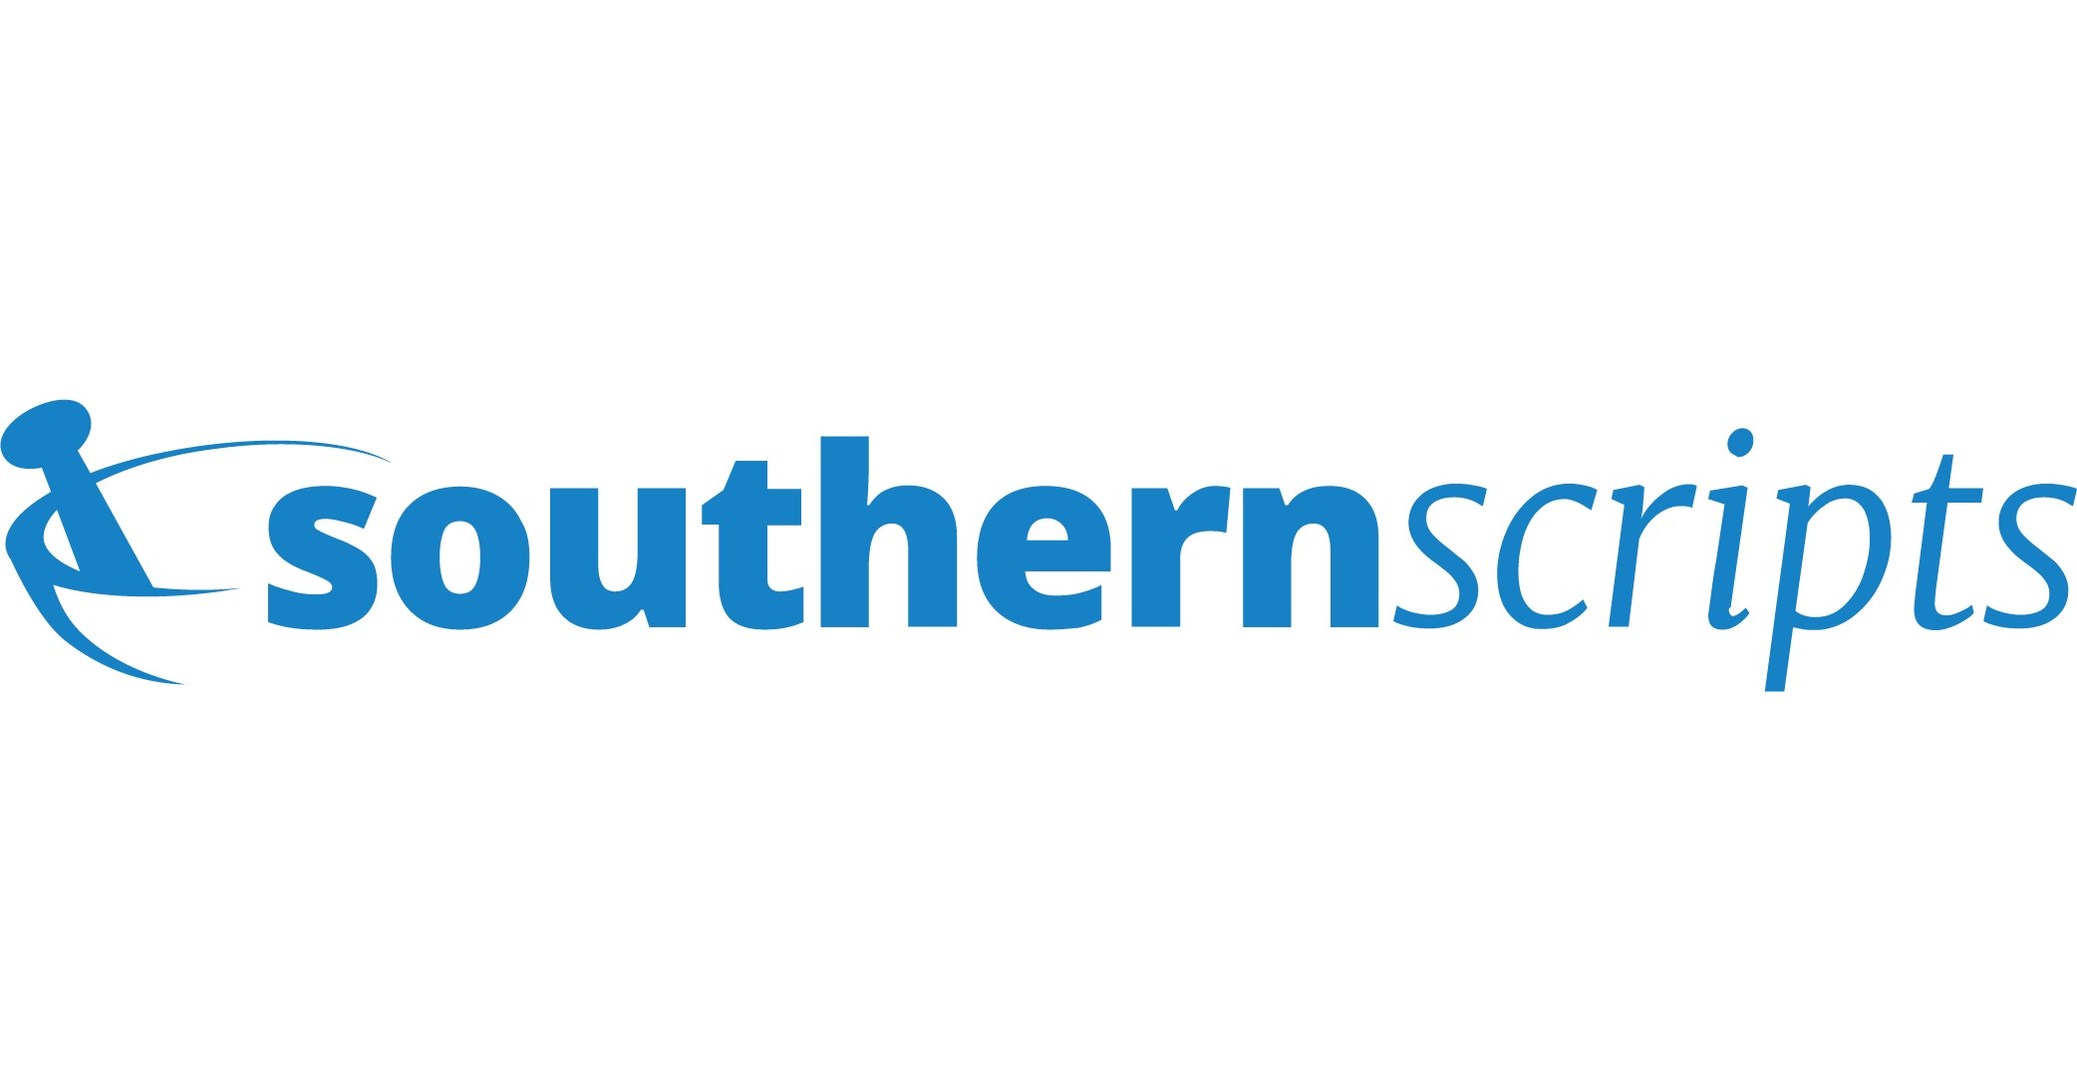 Southern Scripts Launches New Solution to Address HighCost Medications